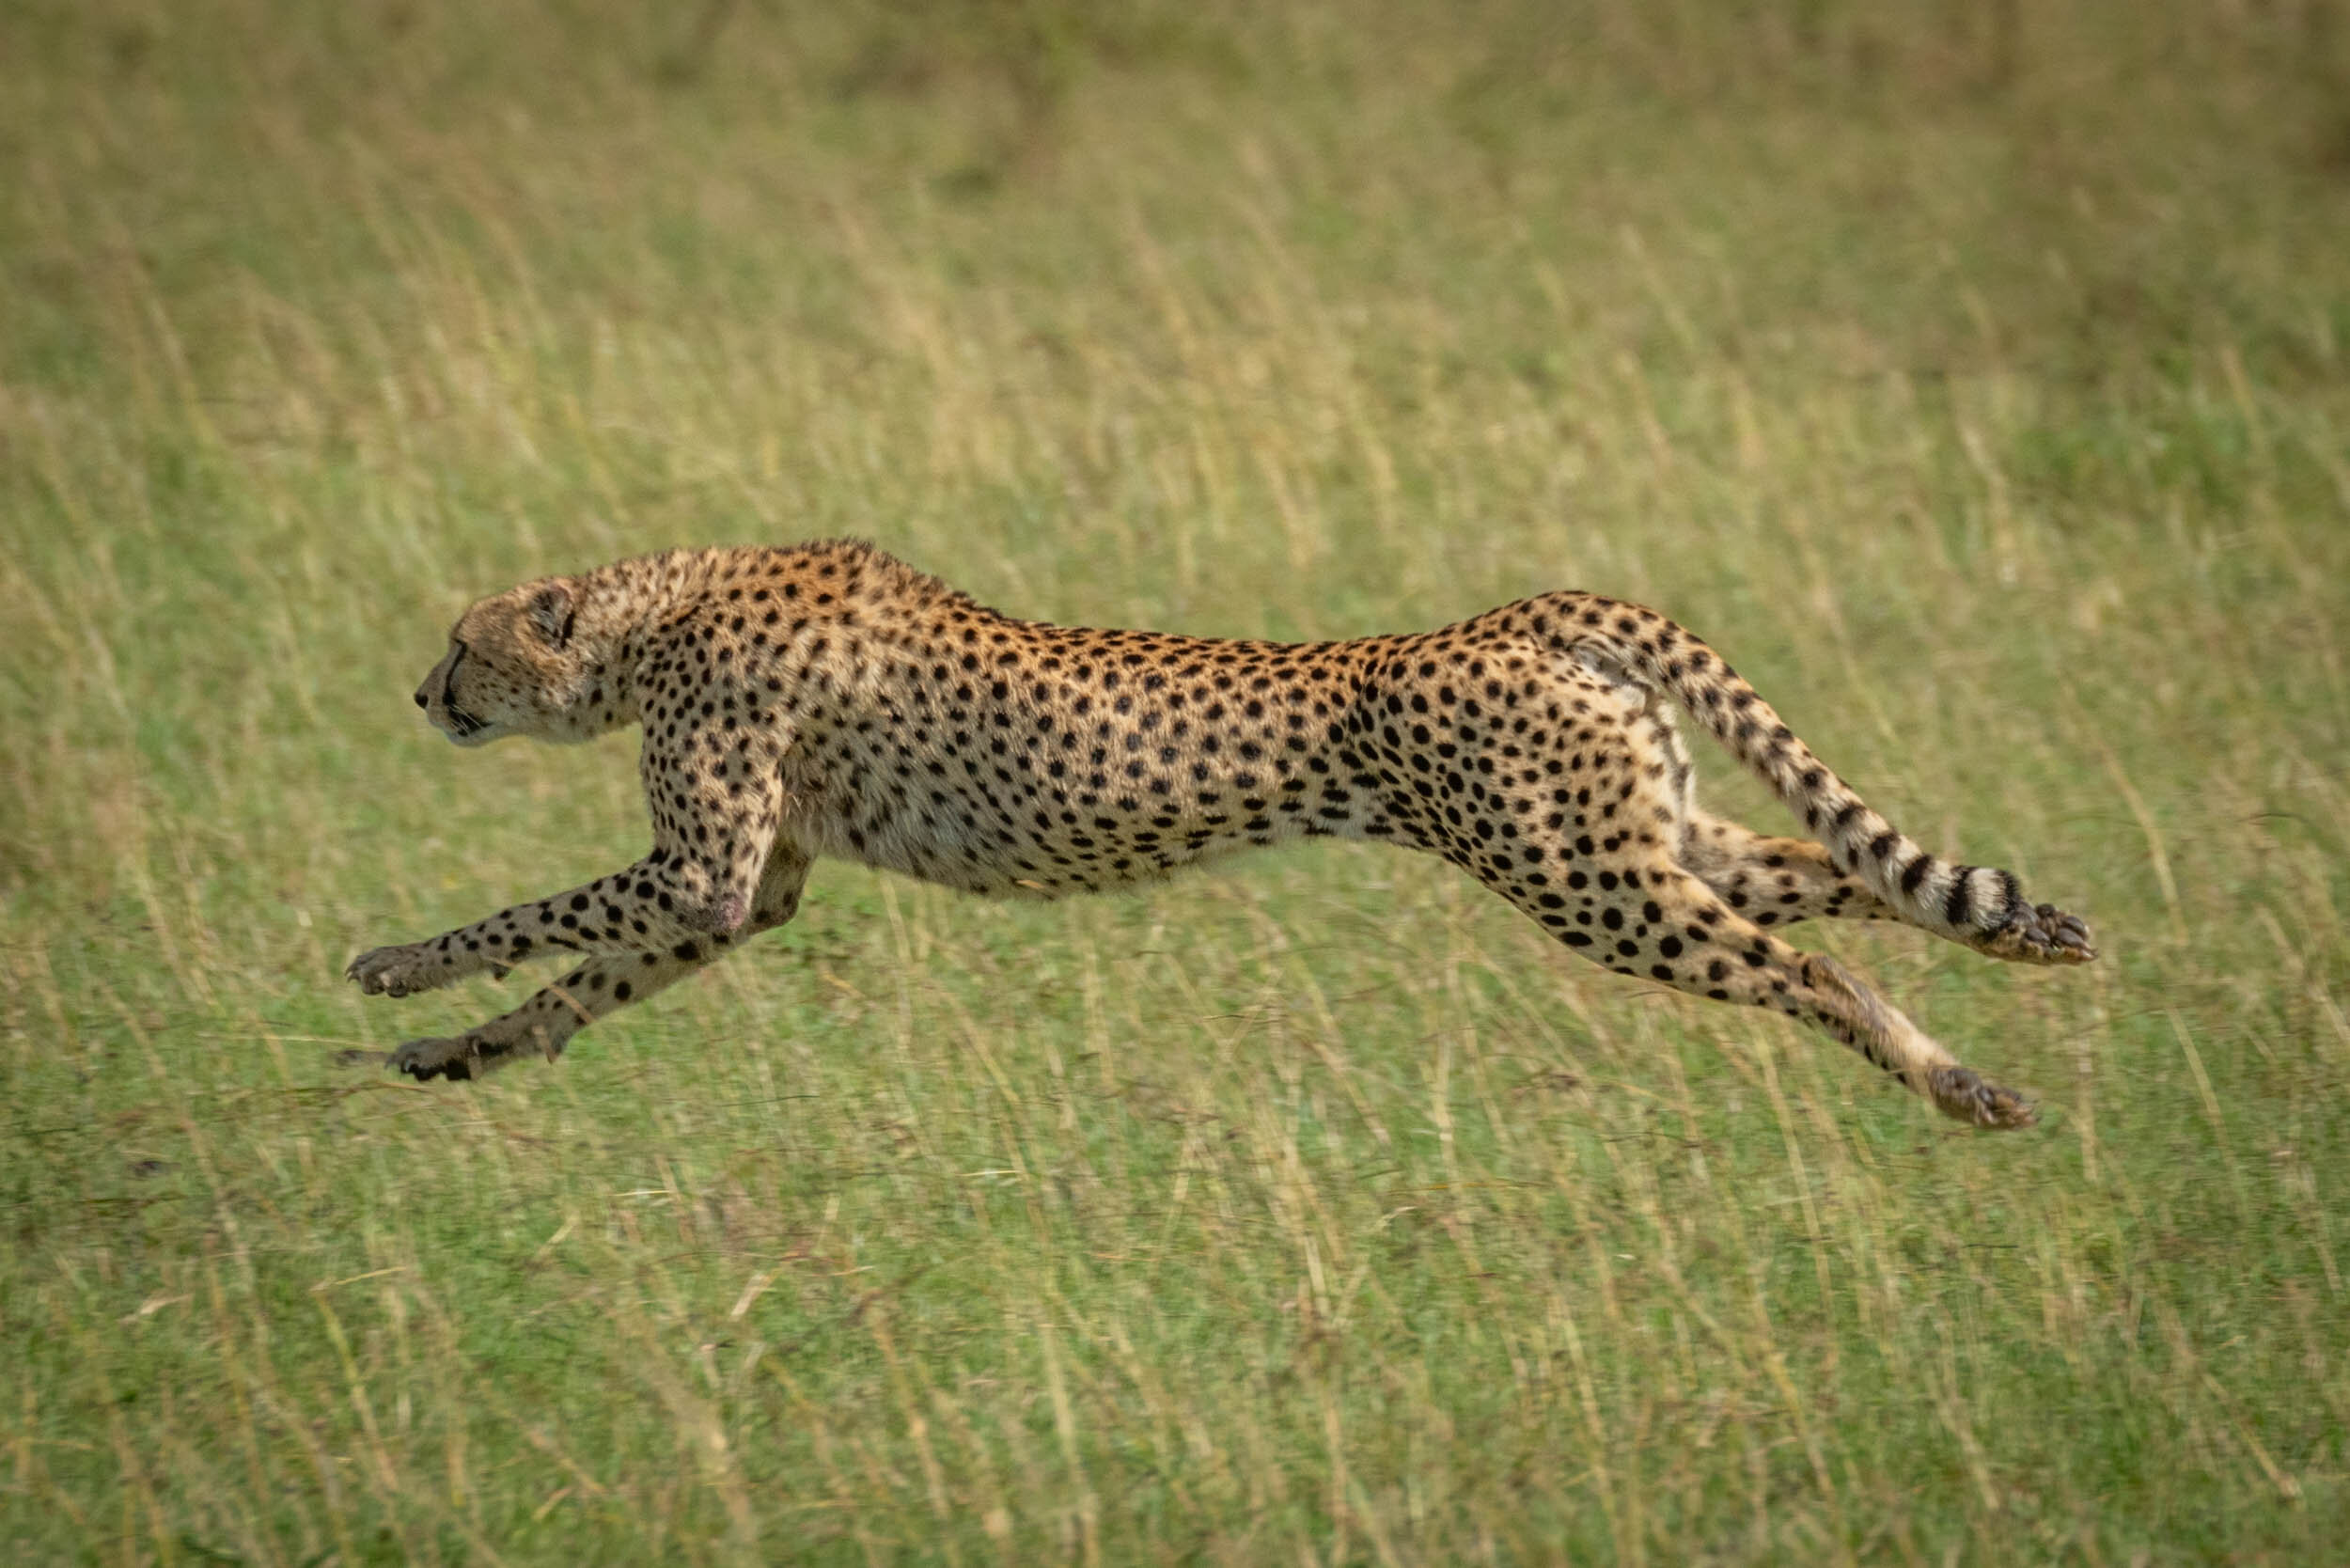 Cheetah stretches legs running at full speed: 74 downloads